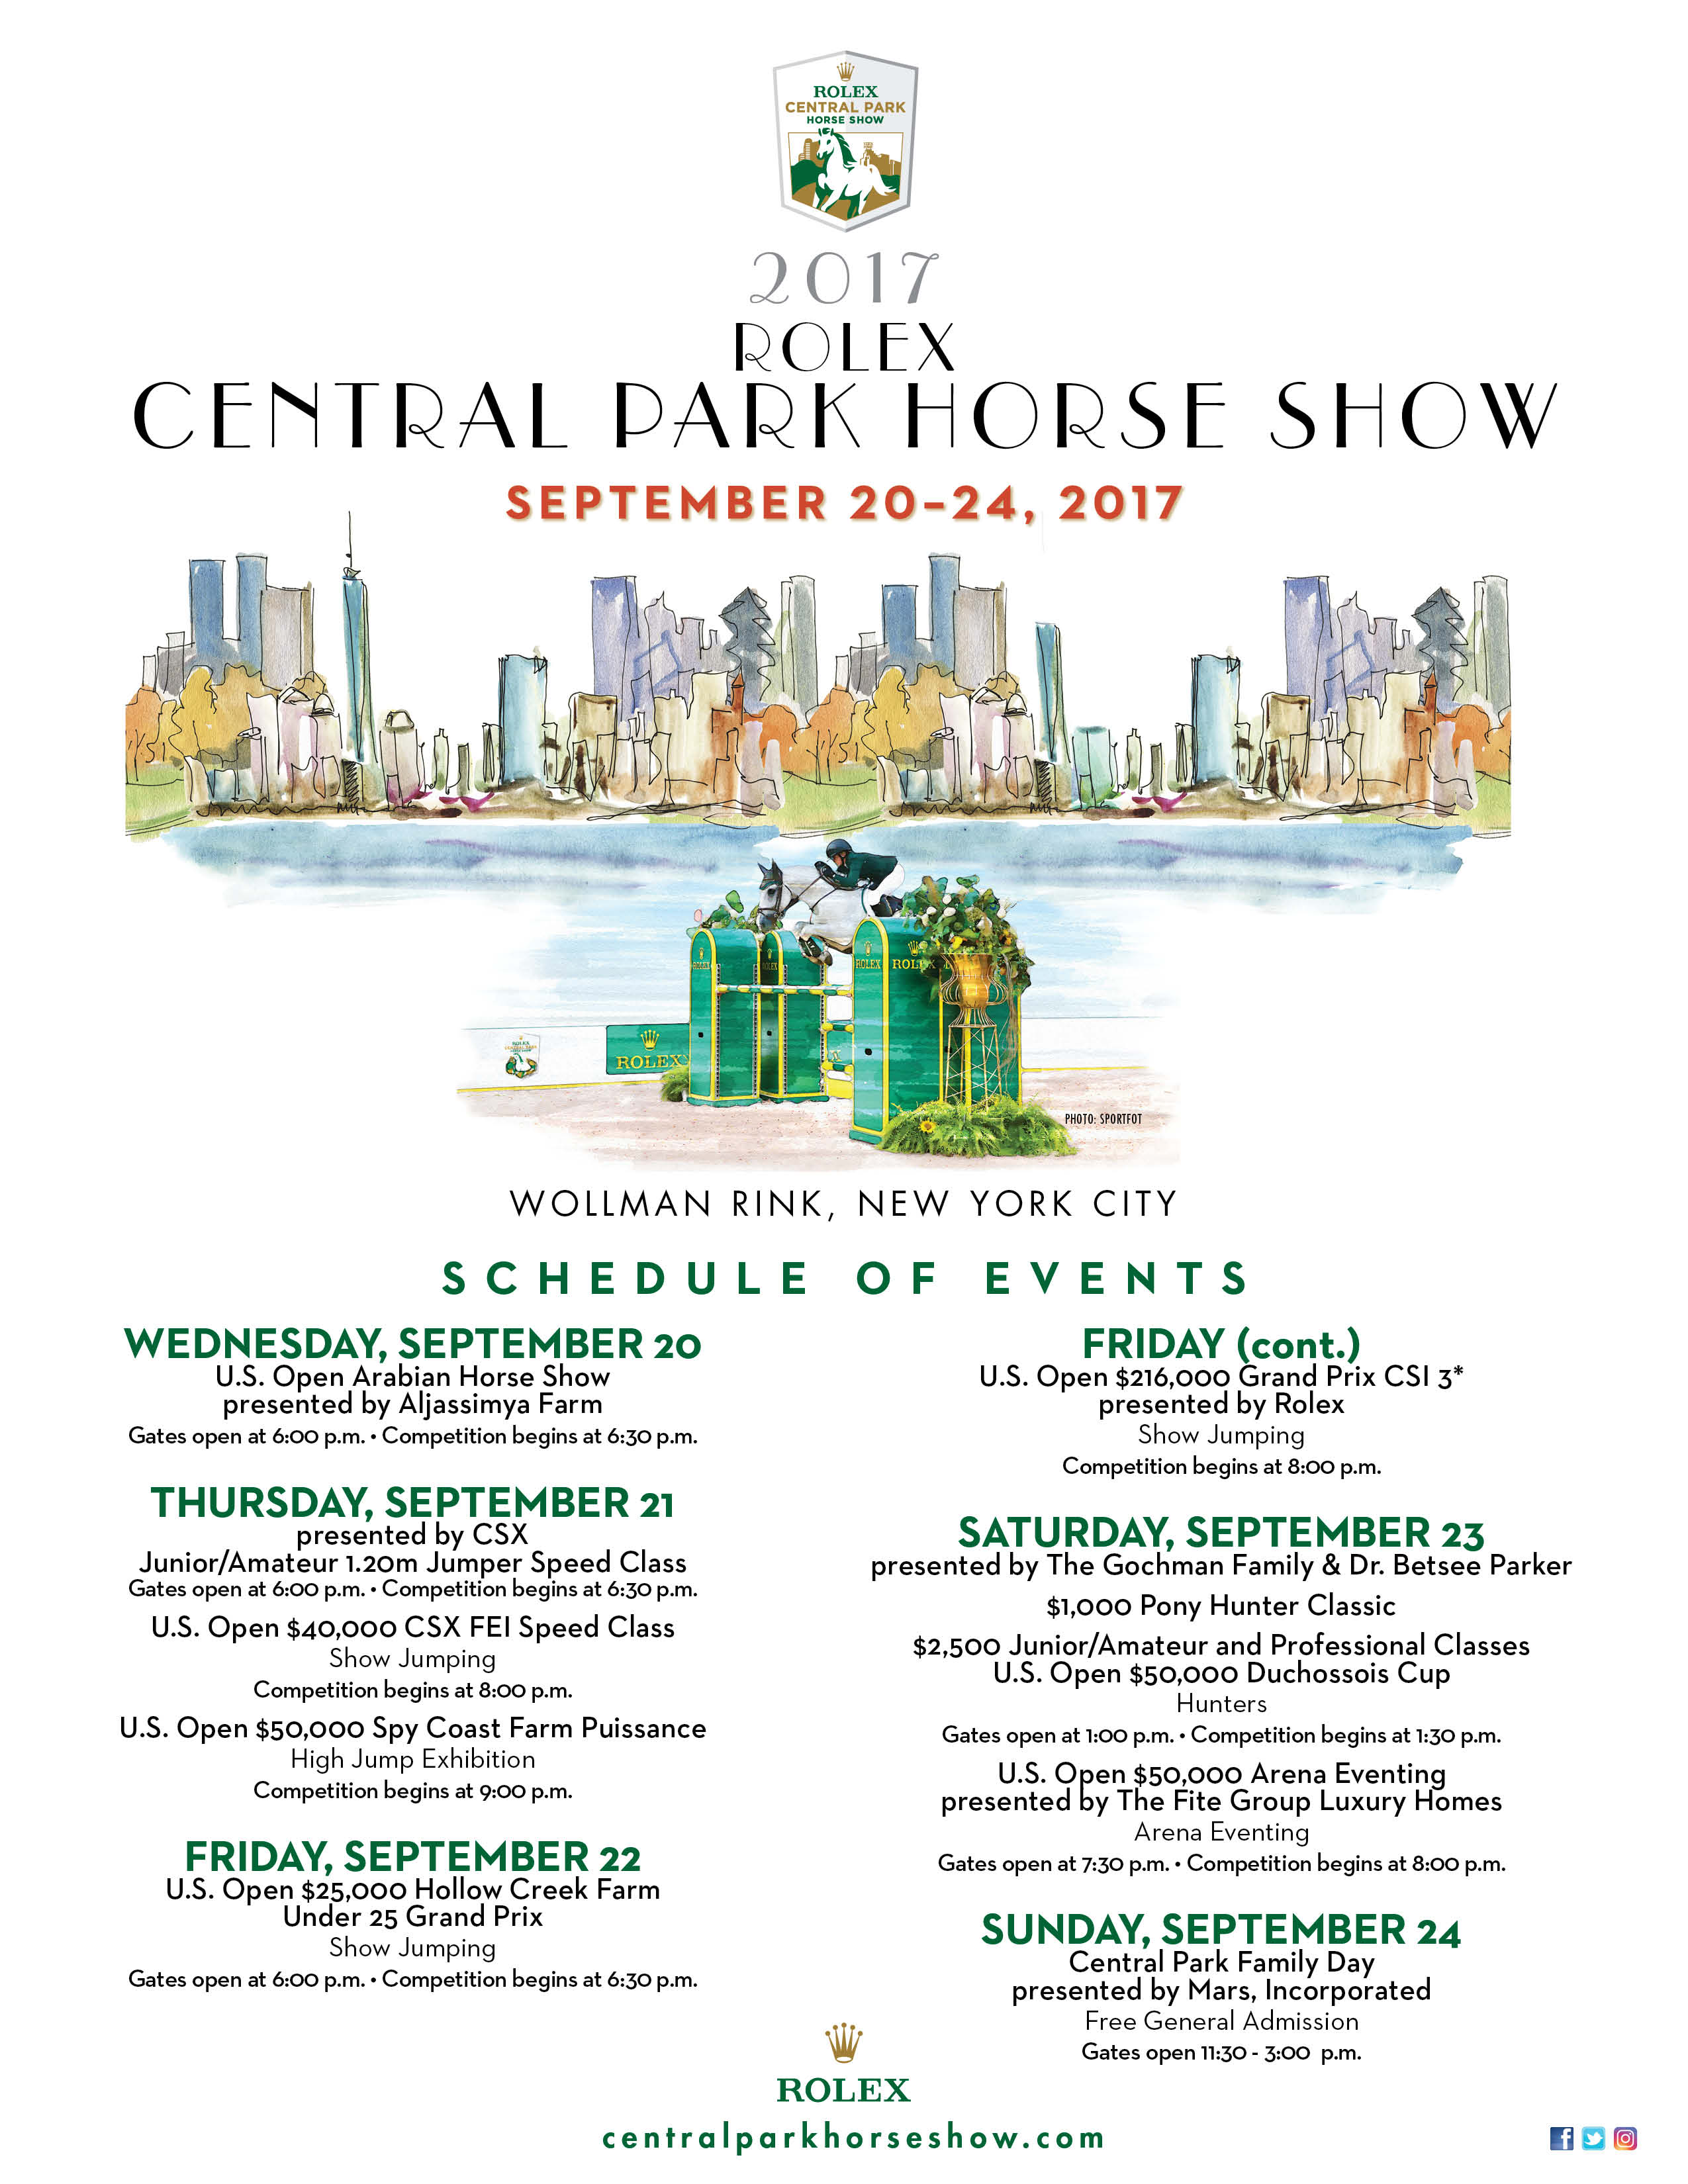 The Fourth Annual Rolex Central Park Horse Show 2017